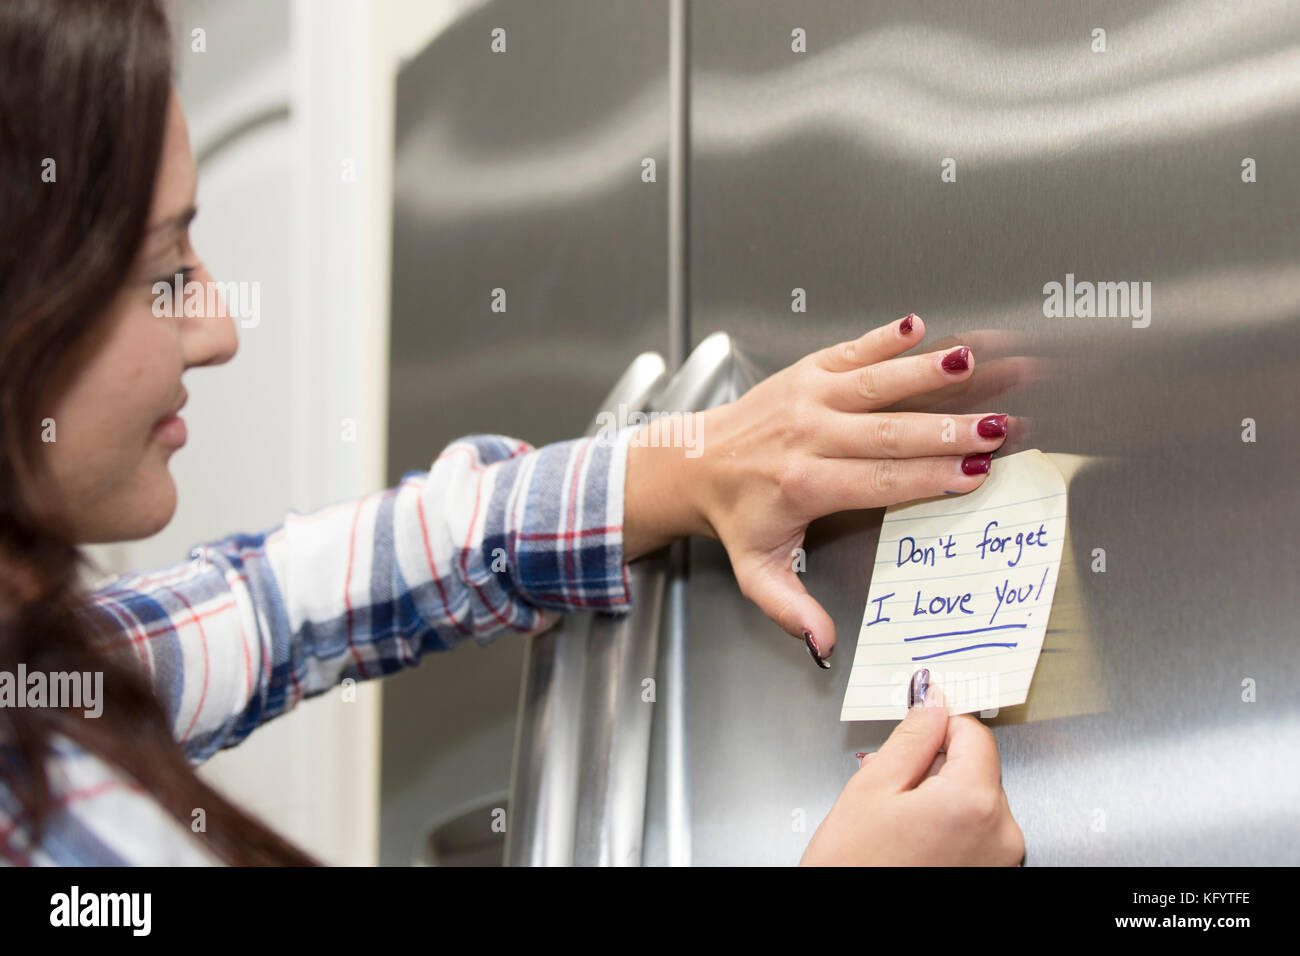 Attractive 20-25 year old female sticking a love note on the refrigerator. Stock Photo